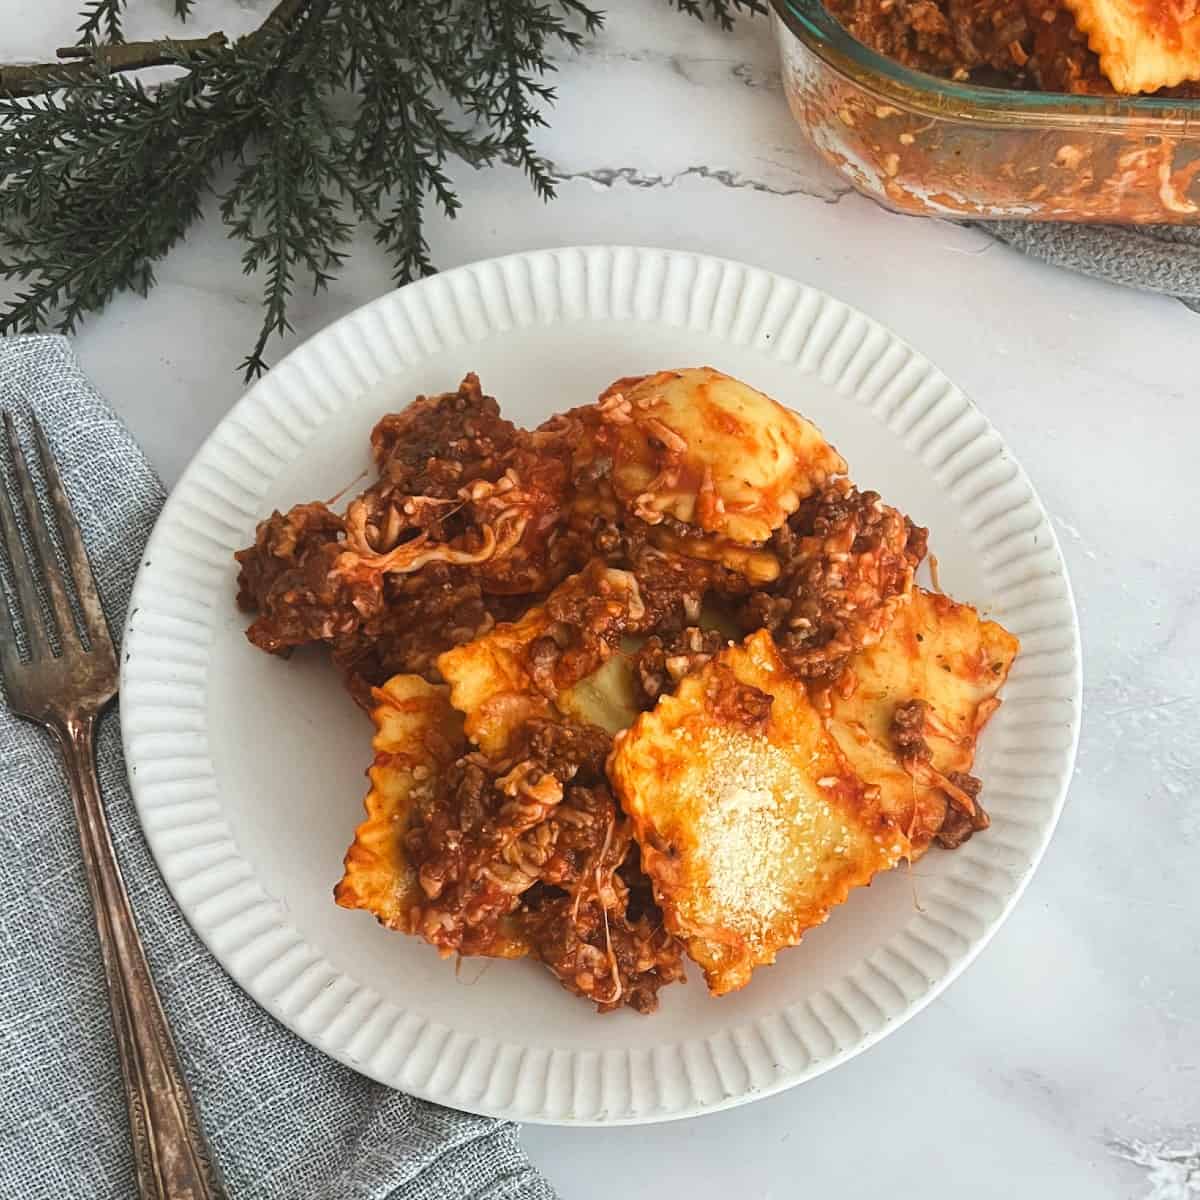 A  plate of ravioli bake with meat sauce and melted cheese on a table. The ravioli bake is on a white plate next to a casserole dish. The casserole dish is filled with ravioli, meat sauce, and melted cheese.